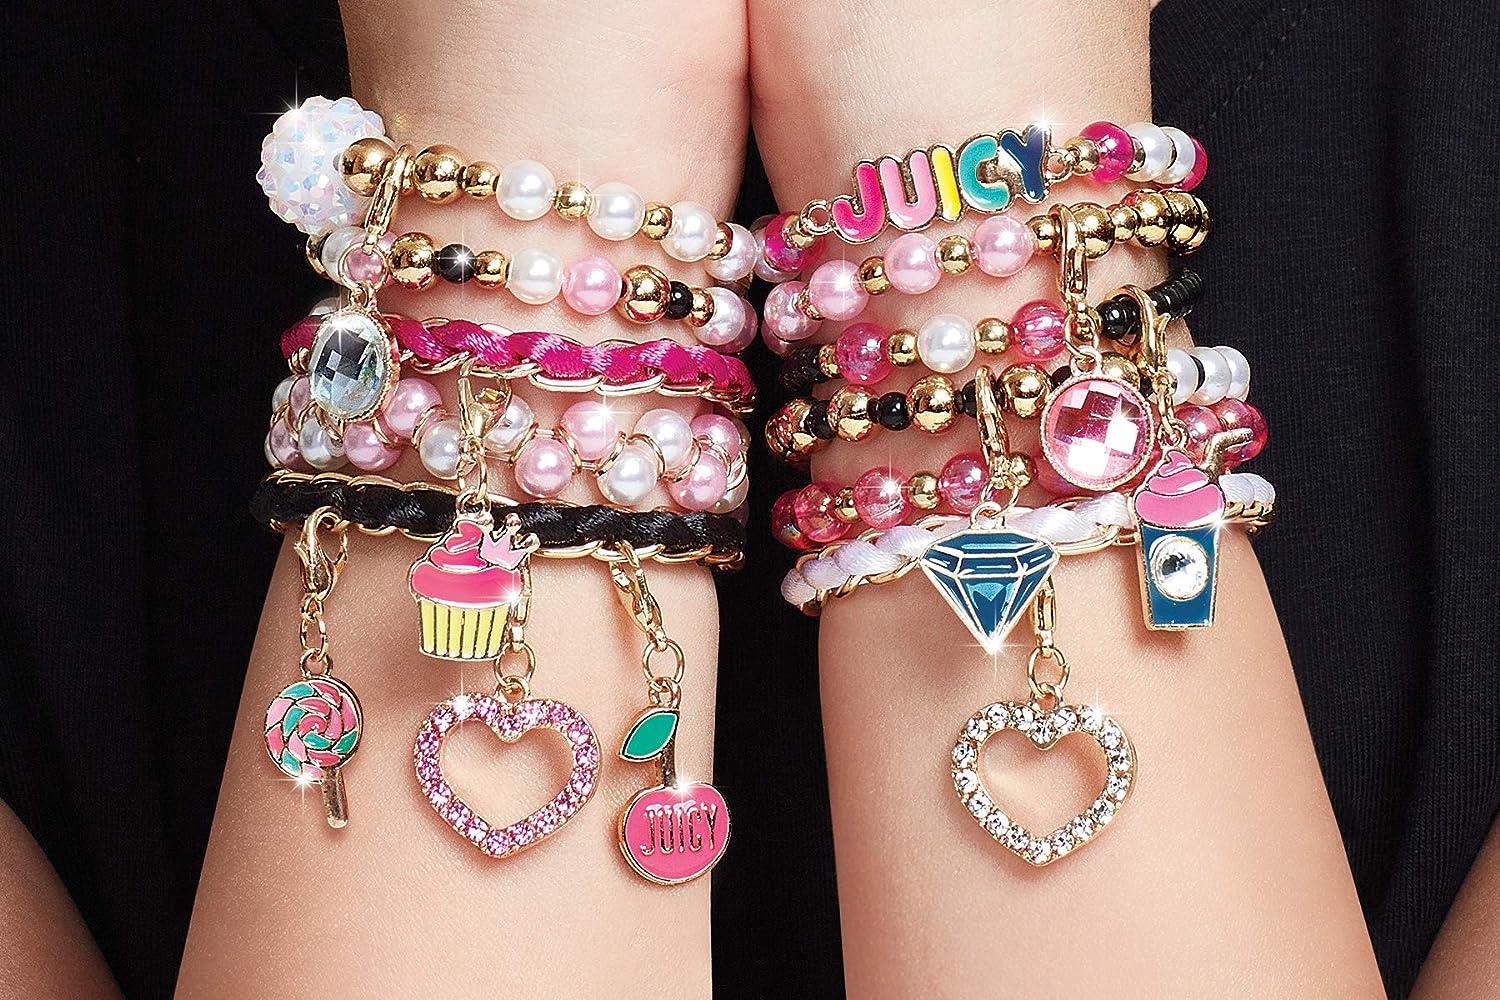 Make it Real - Juicy Couture Pink and Precious Bracelets - DIY Charm  Bracelet Kit with Beads for Tween Jewelry Making - Jewelry Making Kit for  Girls